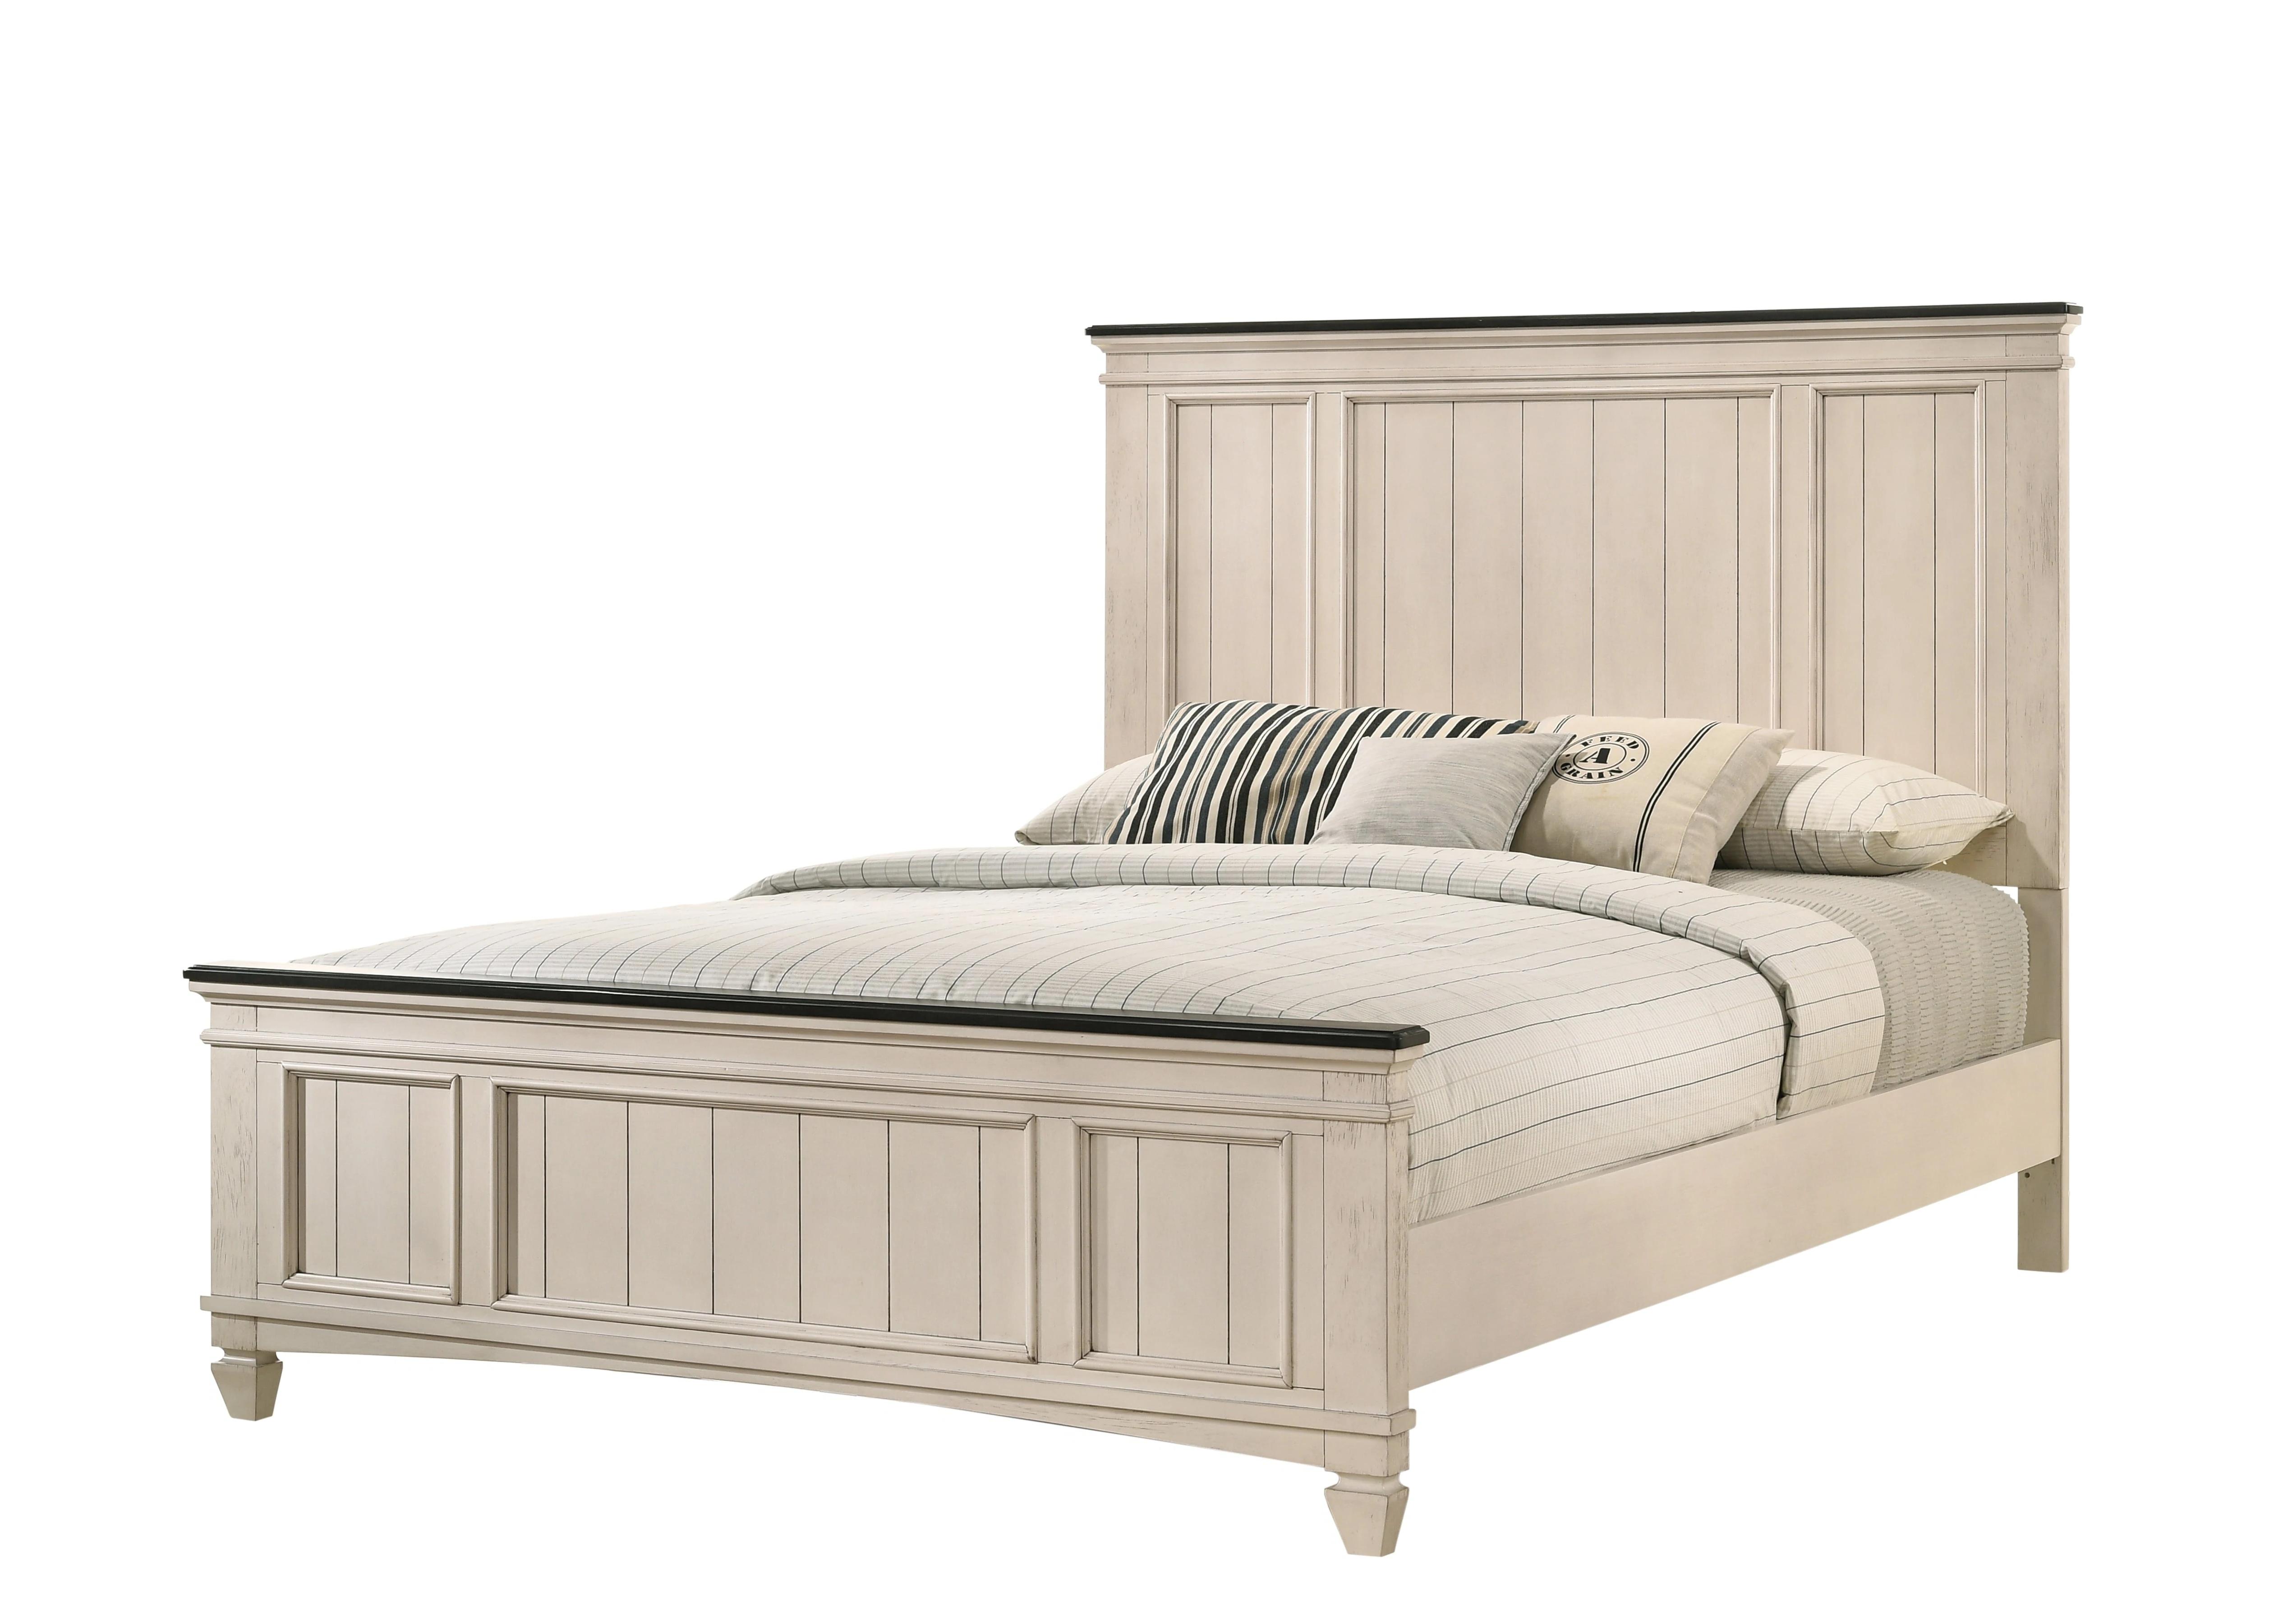 Rustic, Cottage Panel Bed Sawyer B9100-Q-Bed in Beige 